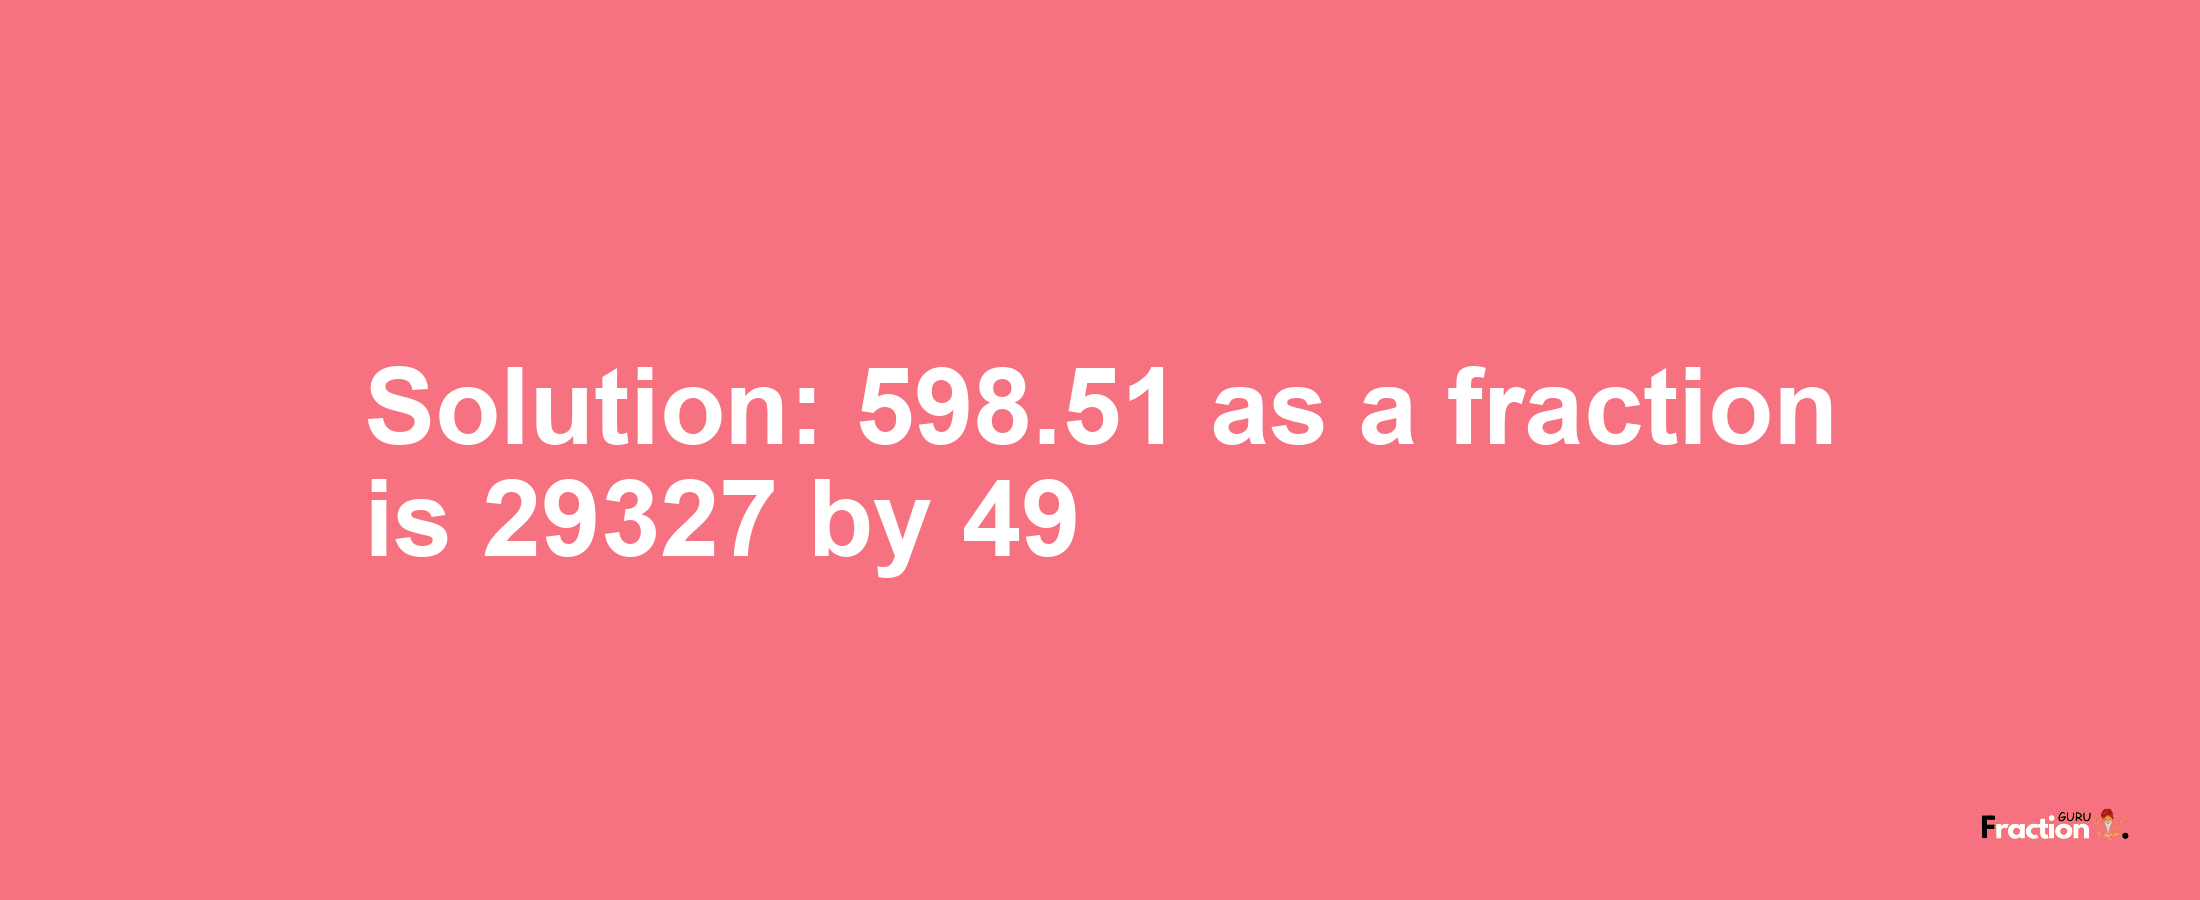 Solution:598.51 as a fraction is 29327/49